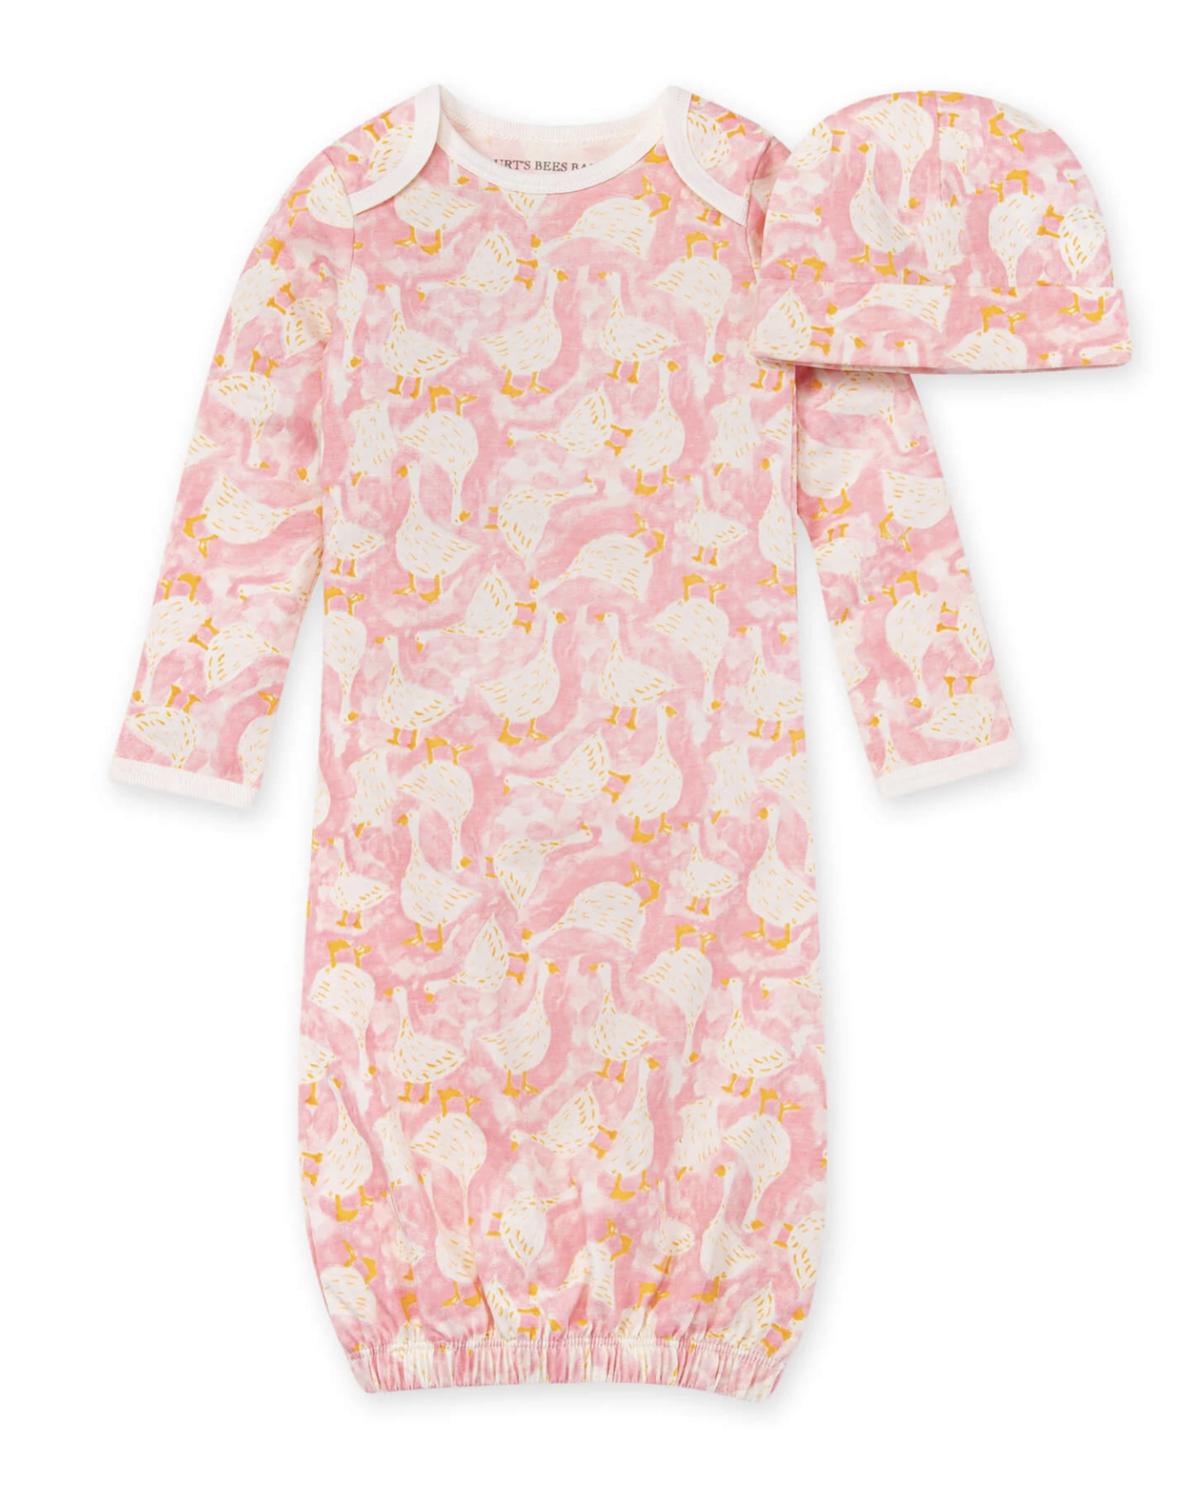 waddle waddle gown and hat set piggie